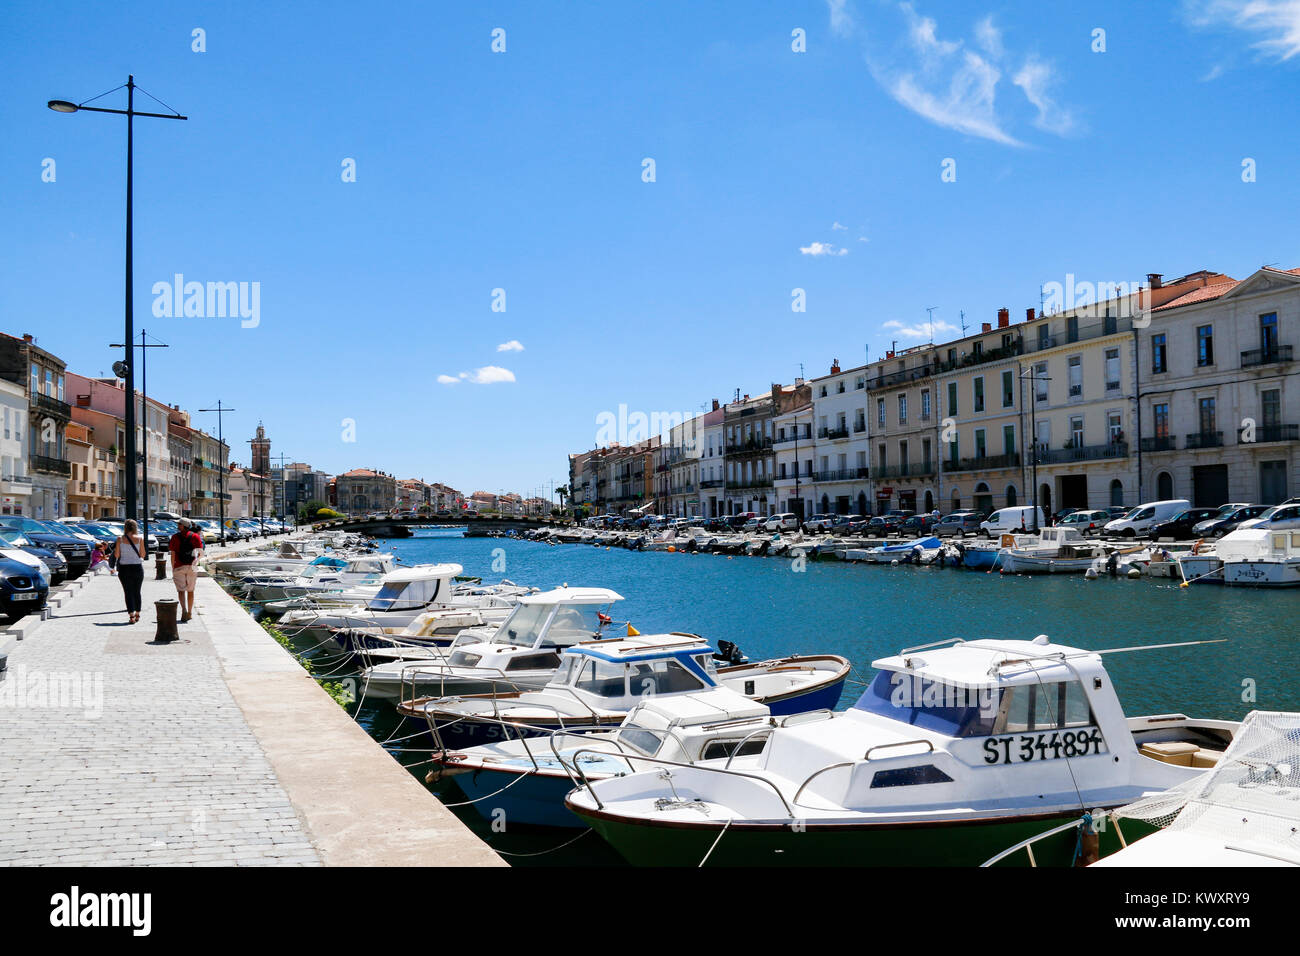 Boats moored along the canal in Sete, Herault, Occitanie, France. A major port on the Mediterranean coast. Stock Photo